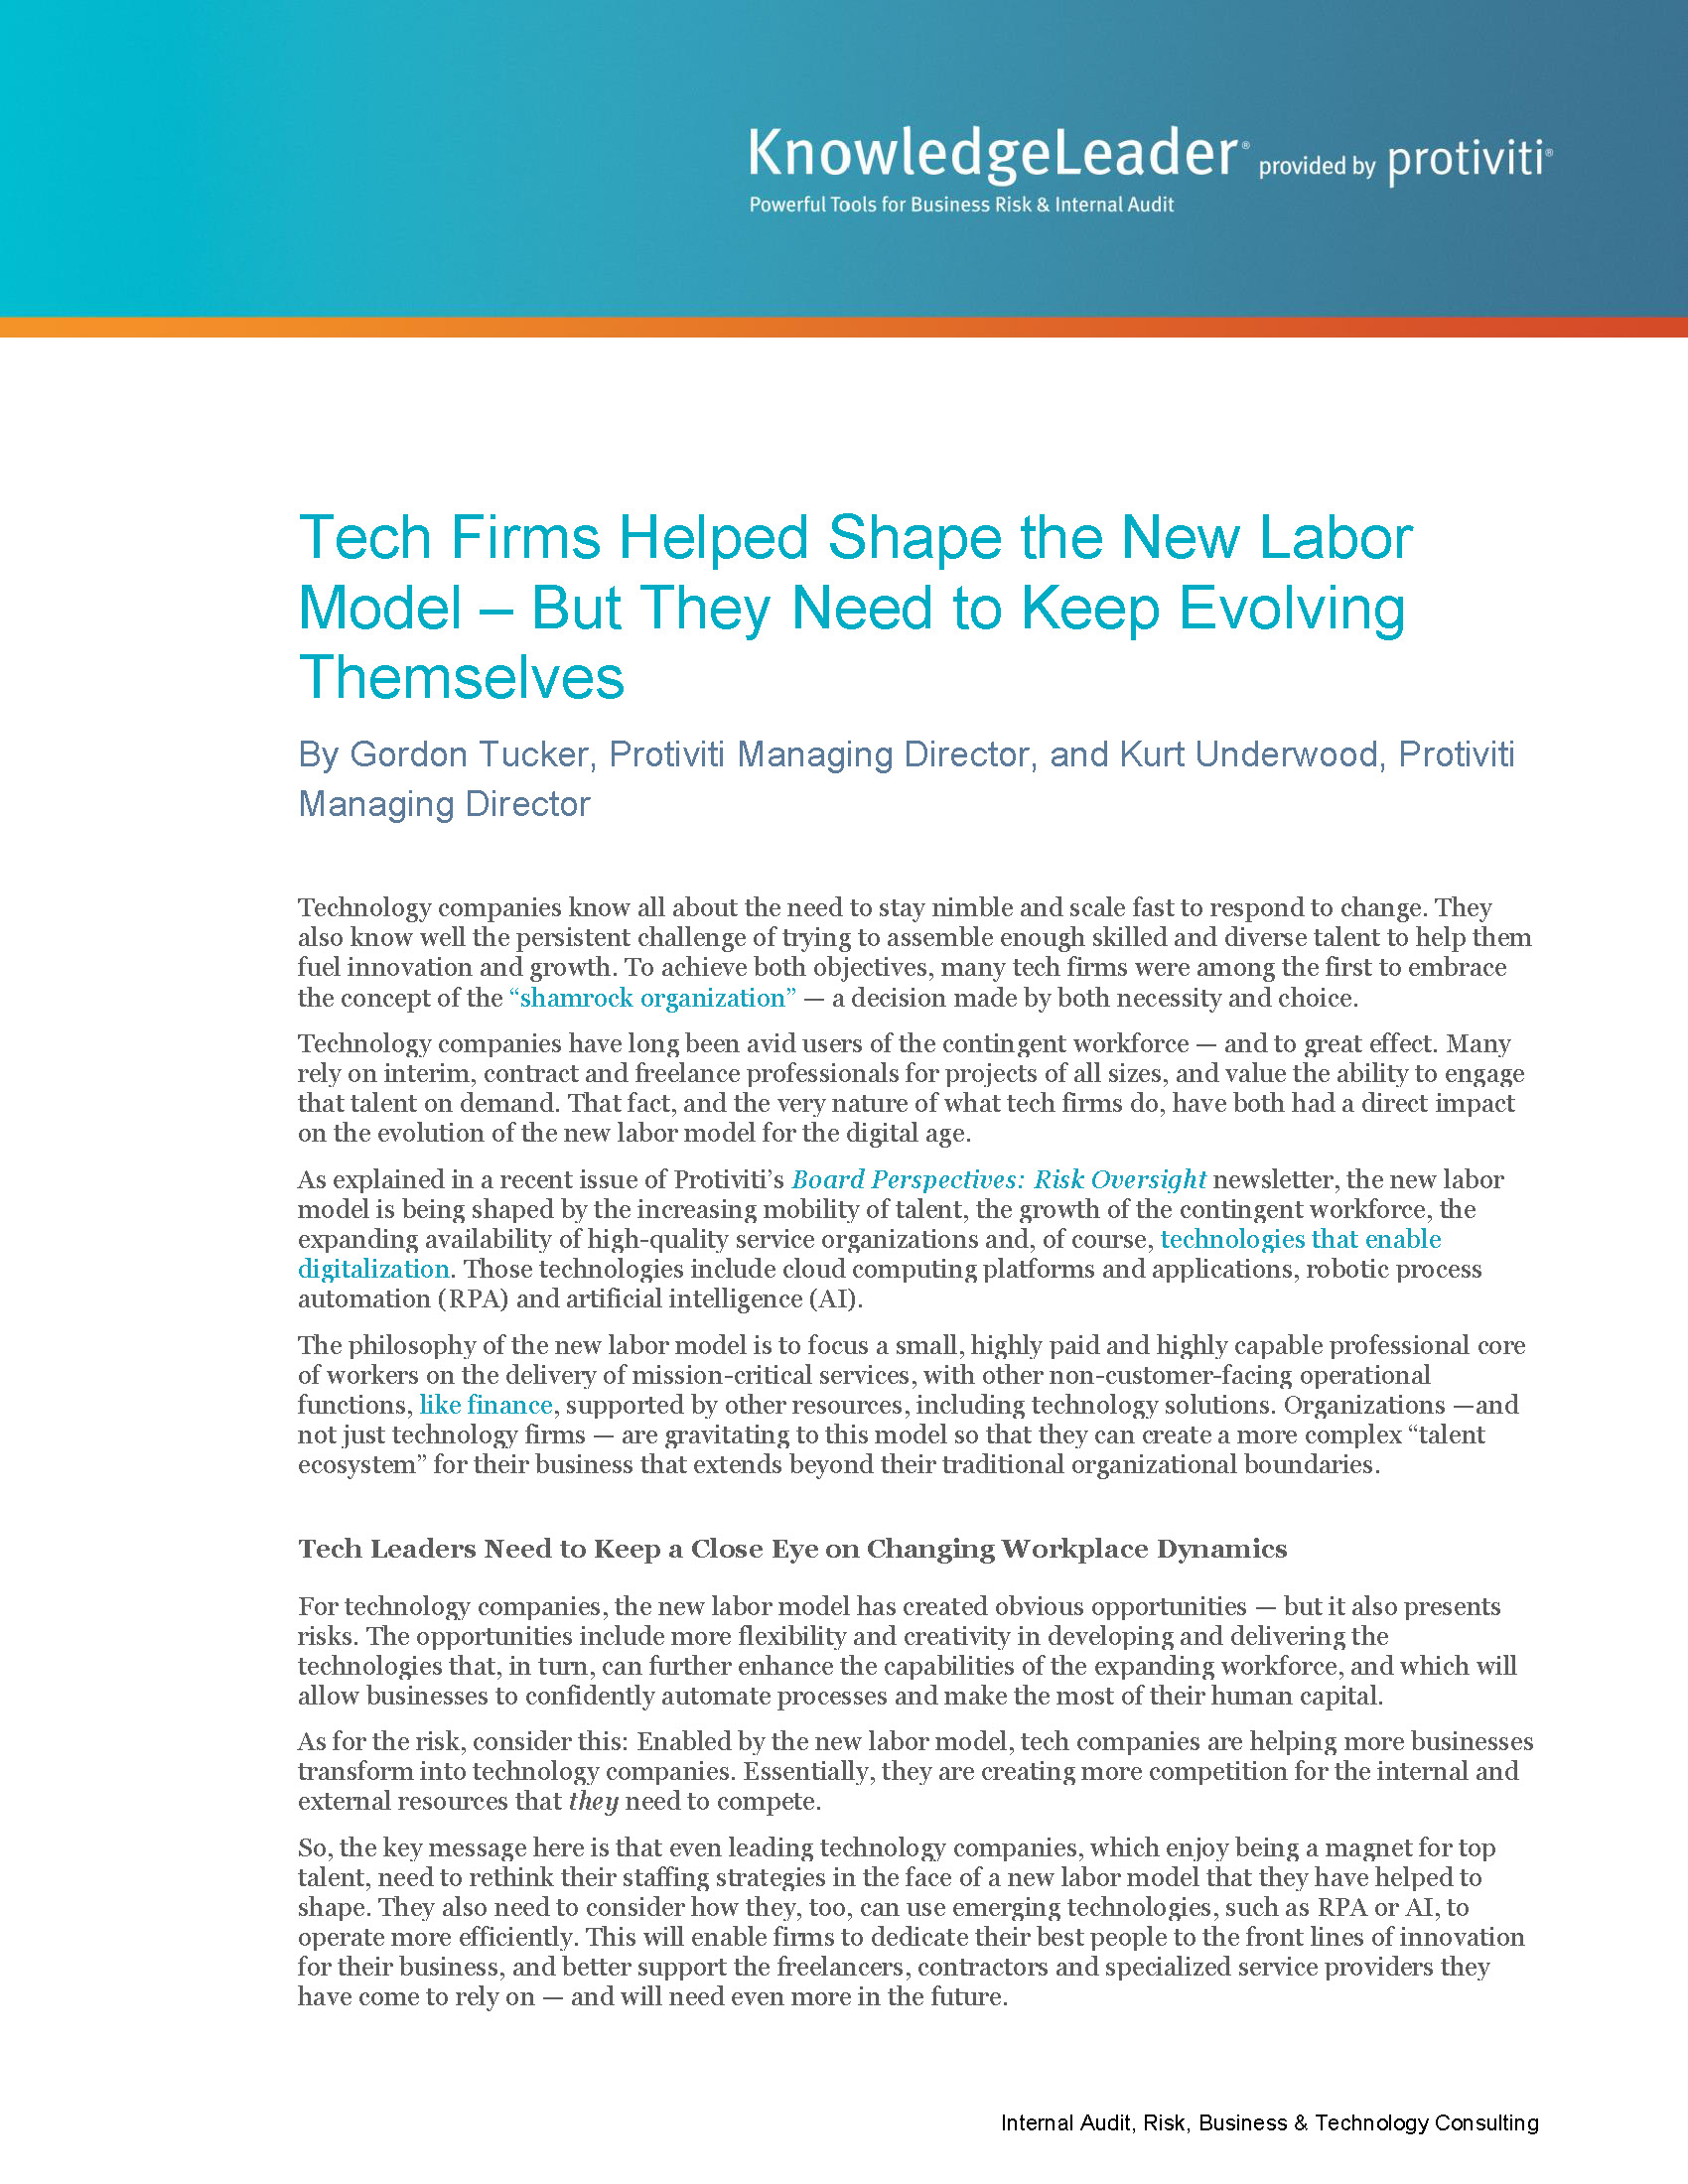 Screenshot of the first page of Tech Firms Helped Shape the New Labor Model – But They Need to Keep Evolving Themselves